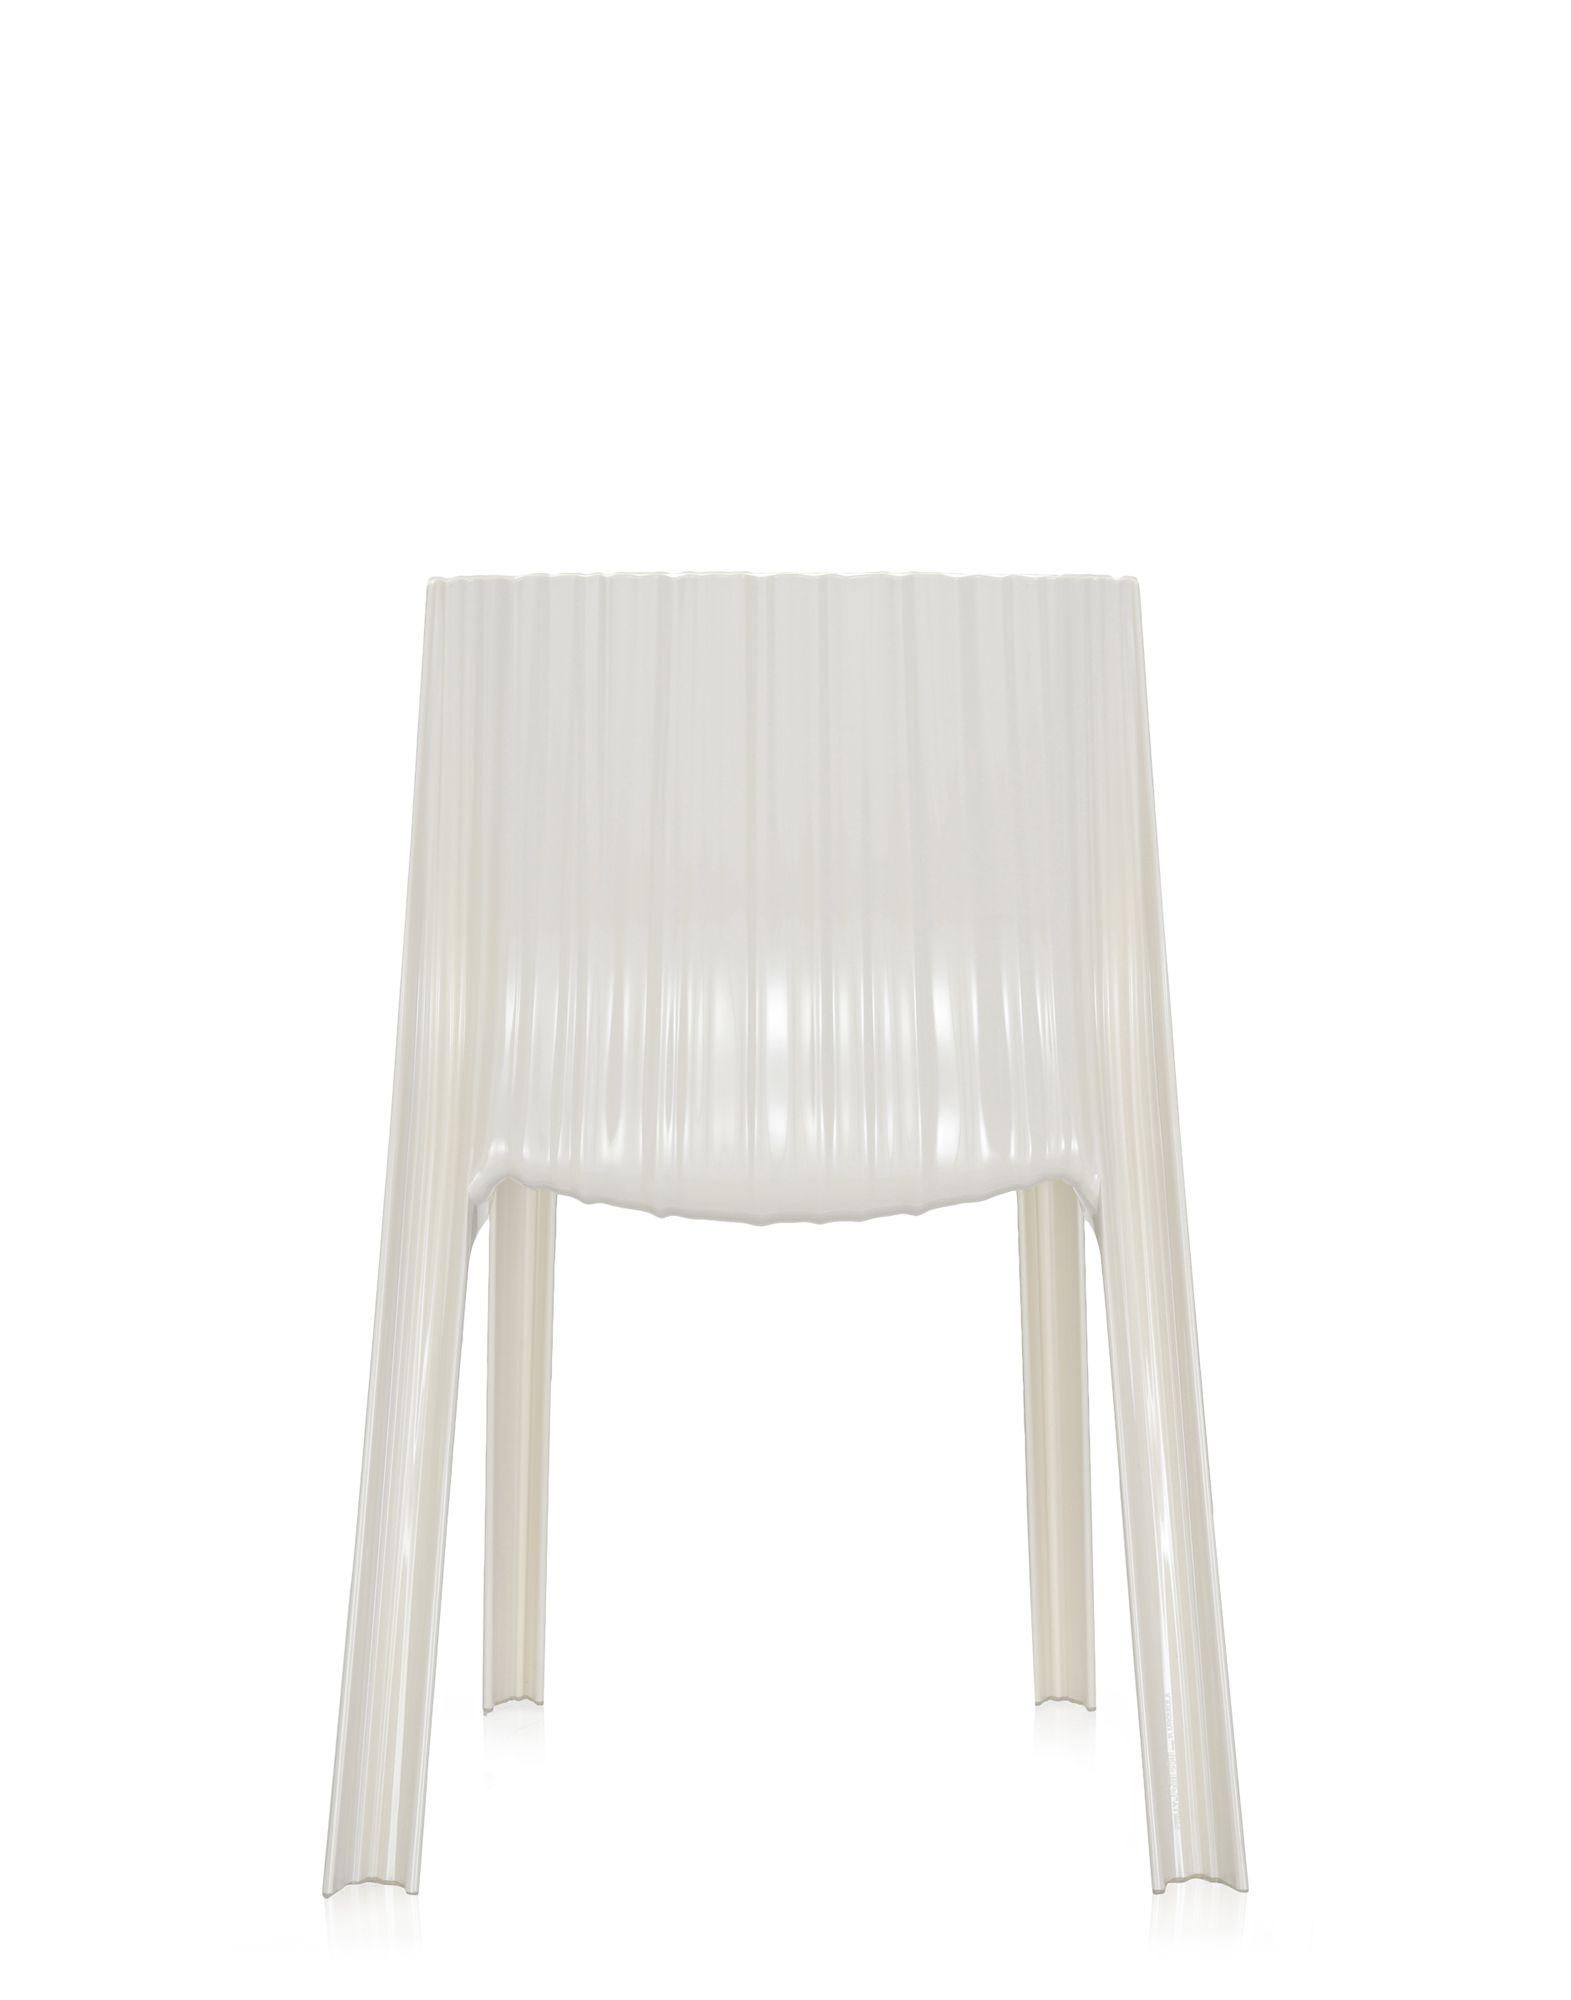 Italian Kartell Frilly Chair in Glossy White by Patricia Urquiola